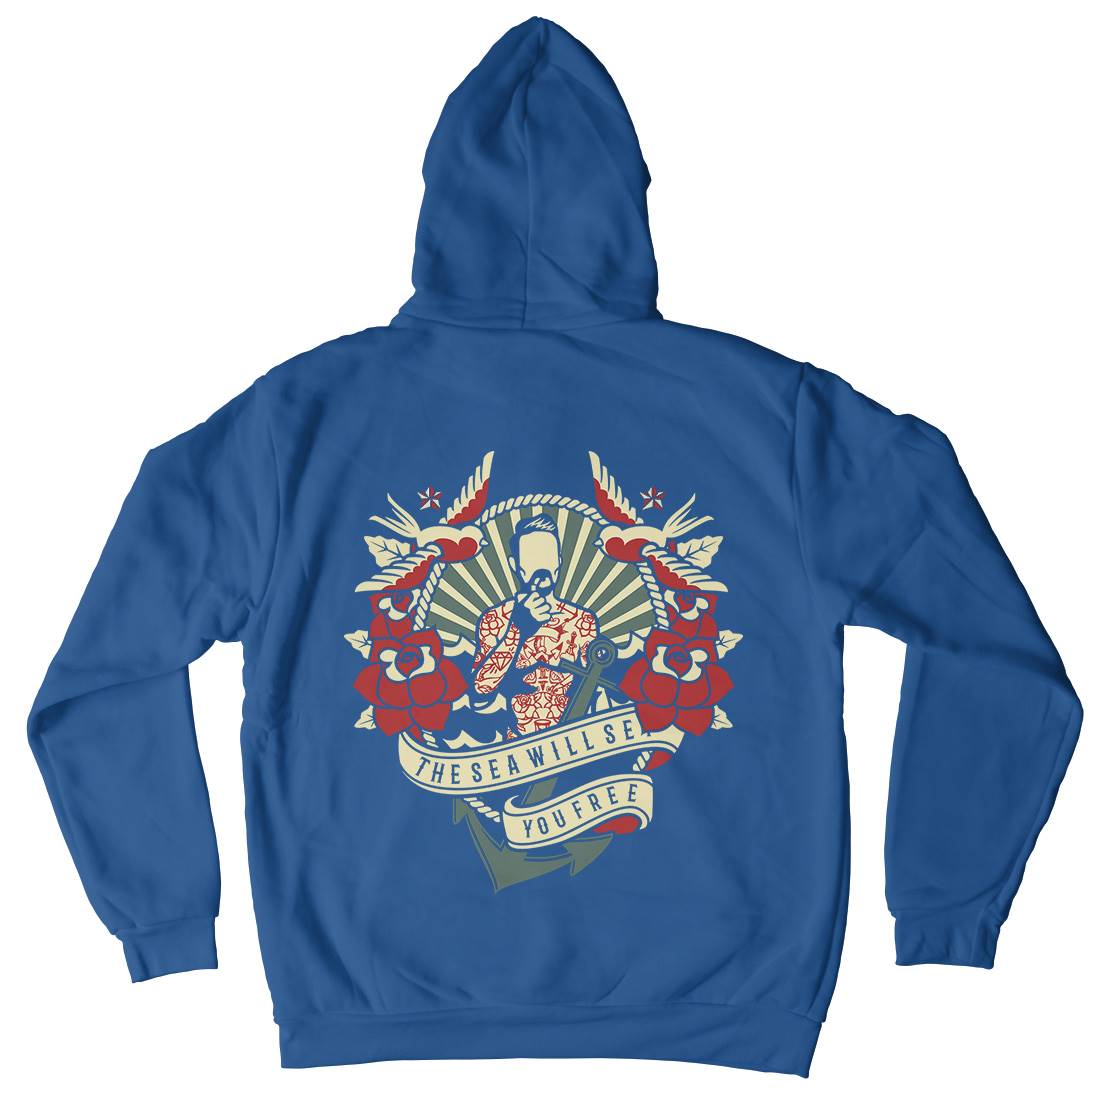 The Sea Will Set You Free Mens Hoodie With Pocket Navy B265